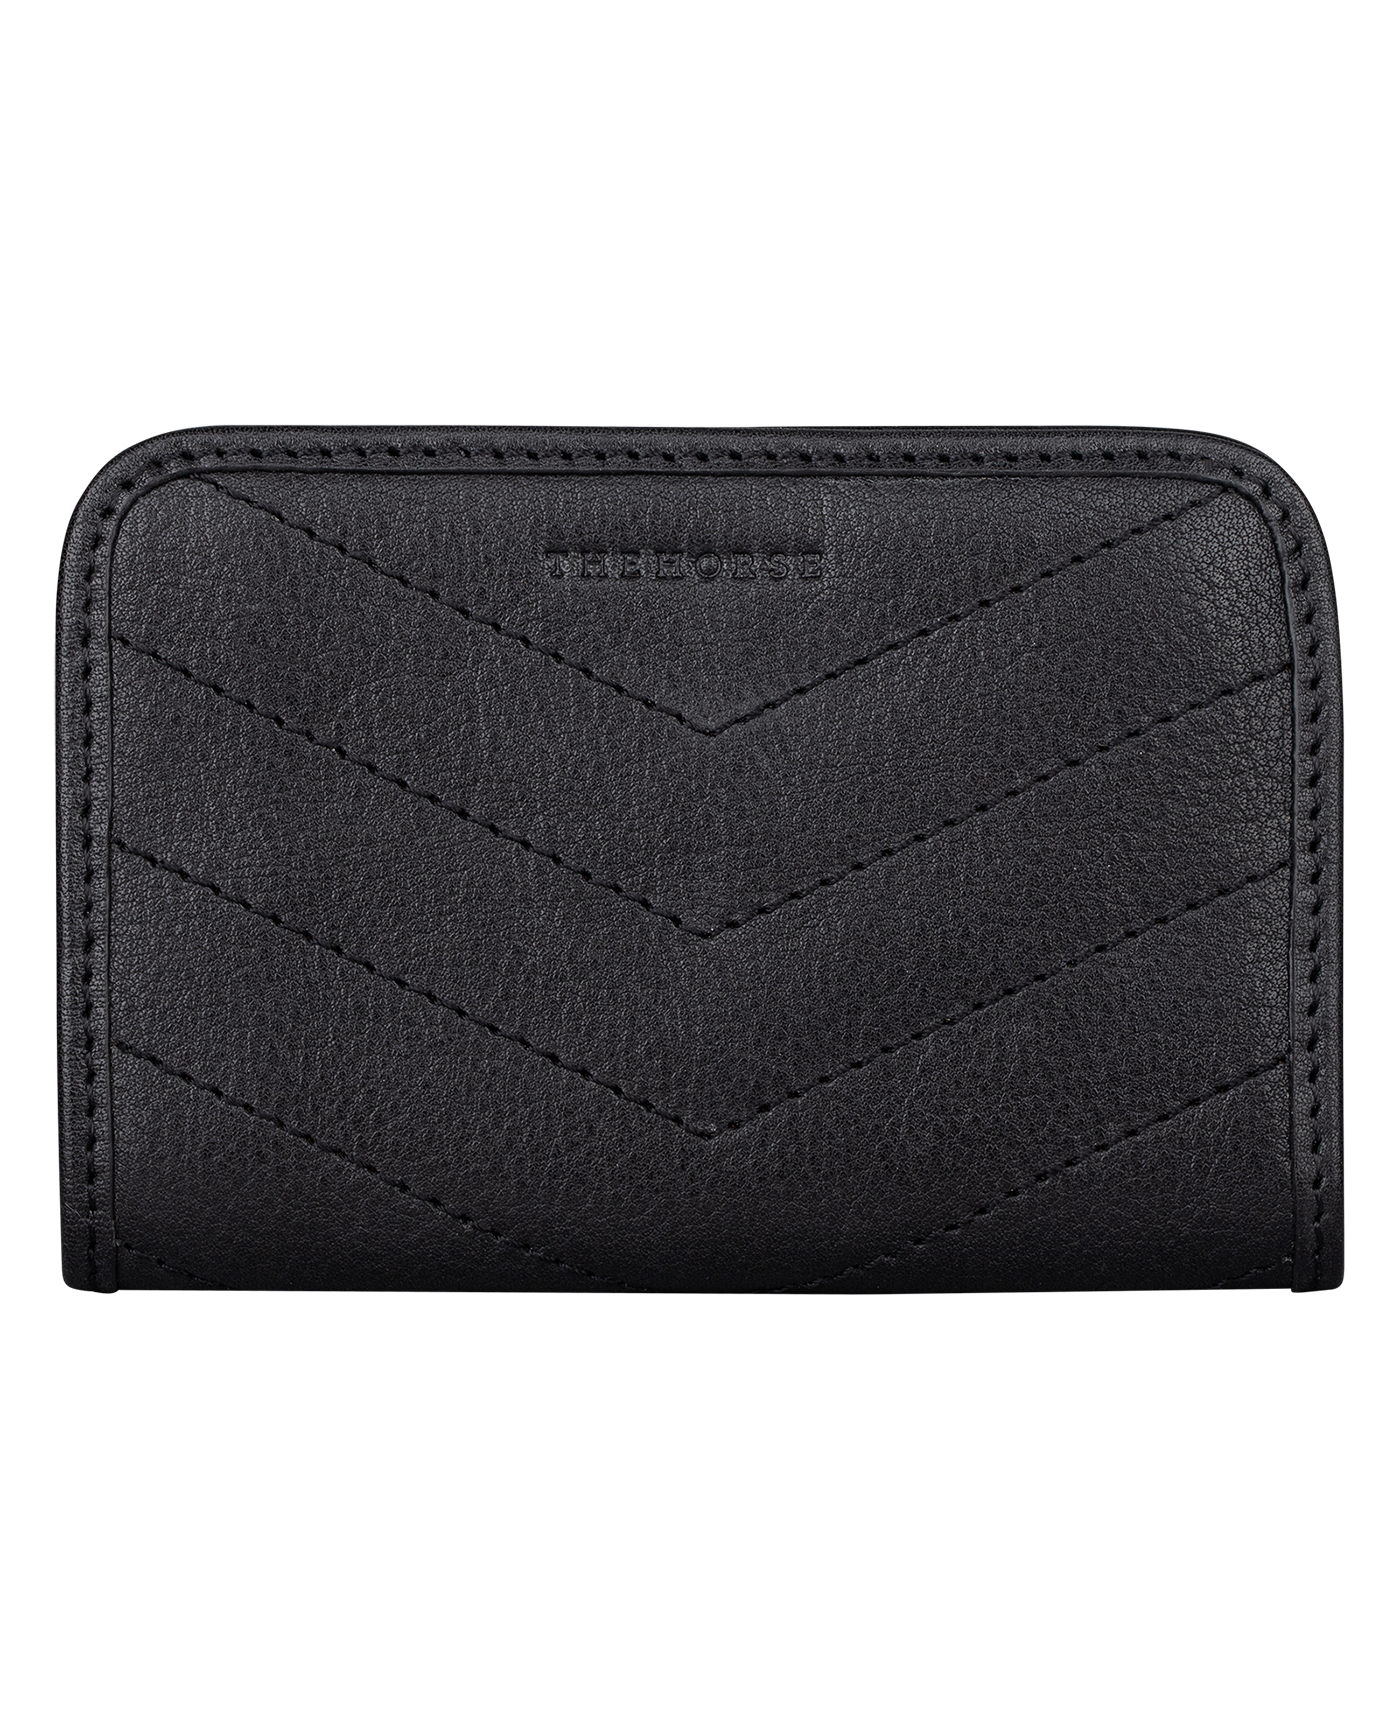 Unity Wallet in Black Grained Leather / Quilted Finish by The Horse